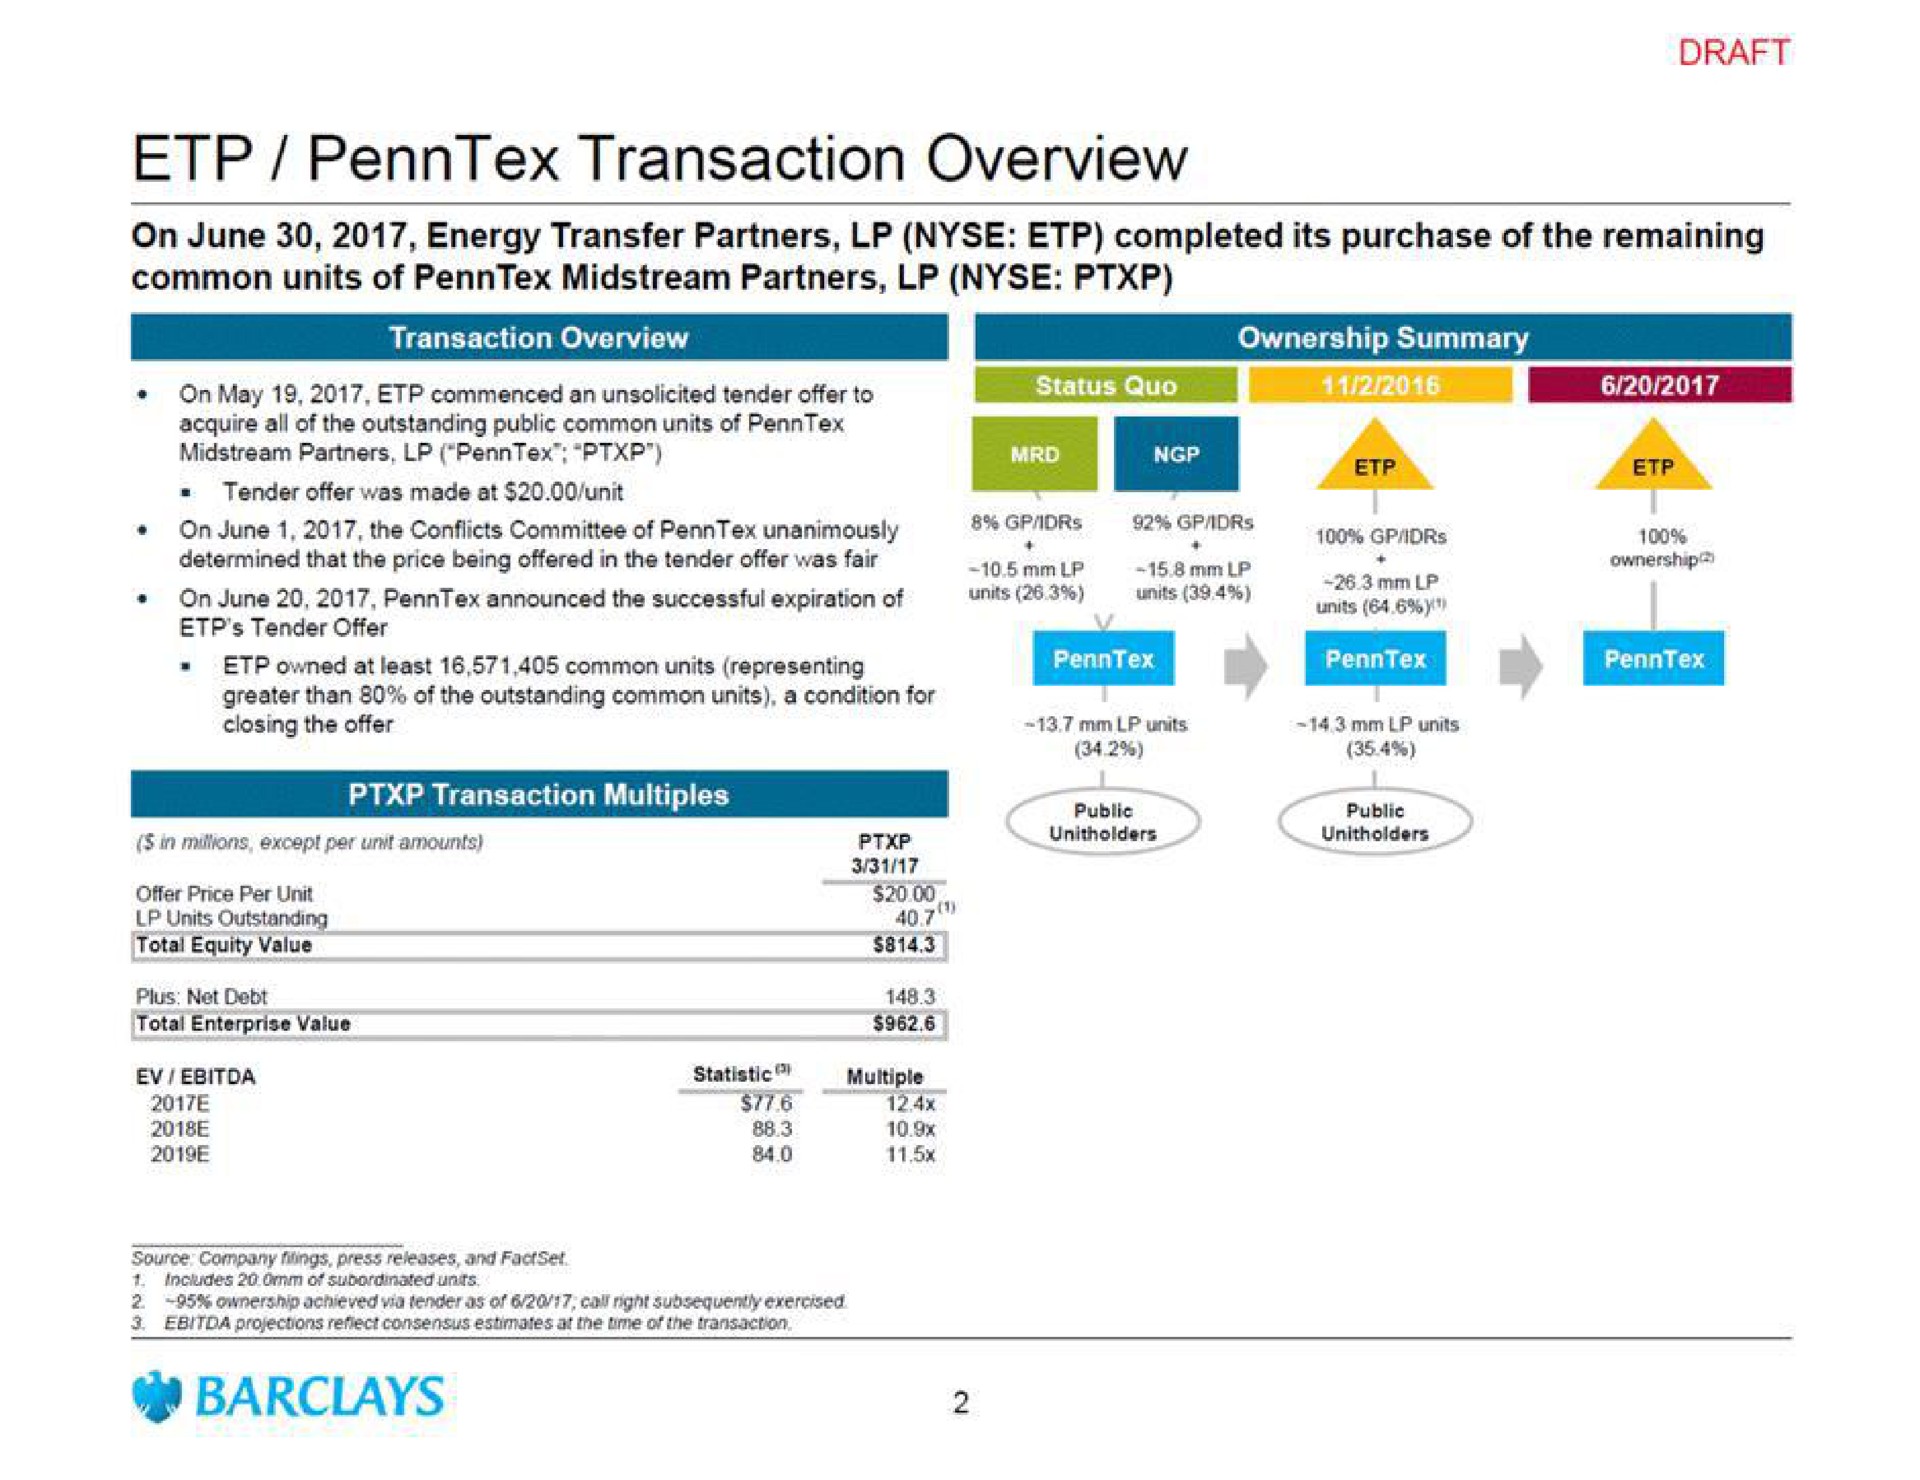 transaction overview | Barclays